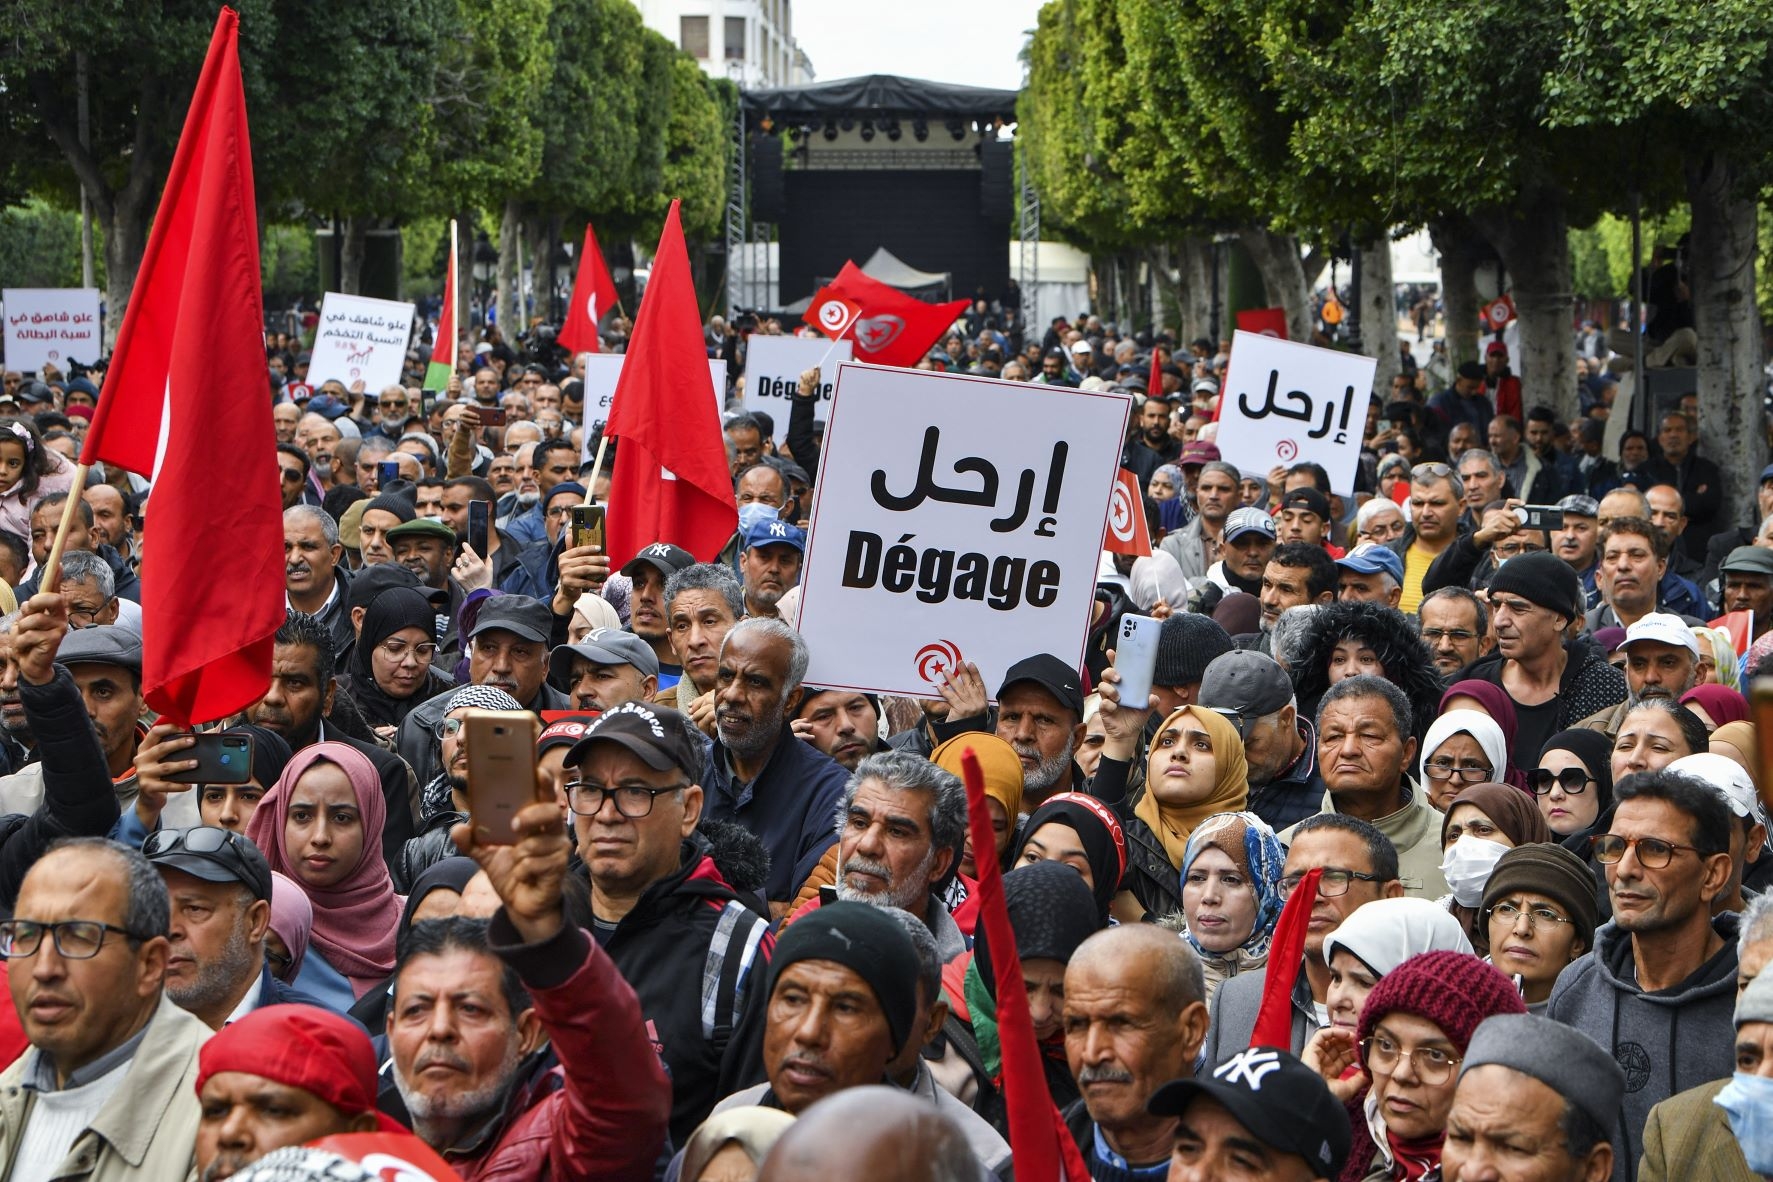 Tunisian demonstrators take part in a rally against President Kais Saied, called for by the opposition "National Salvation Front" coalition, in the capital Tunis, on December 10, 2022 (AFP)